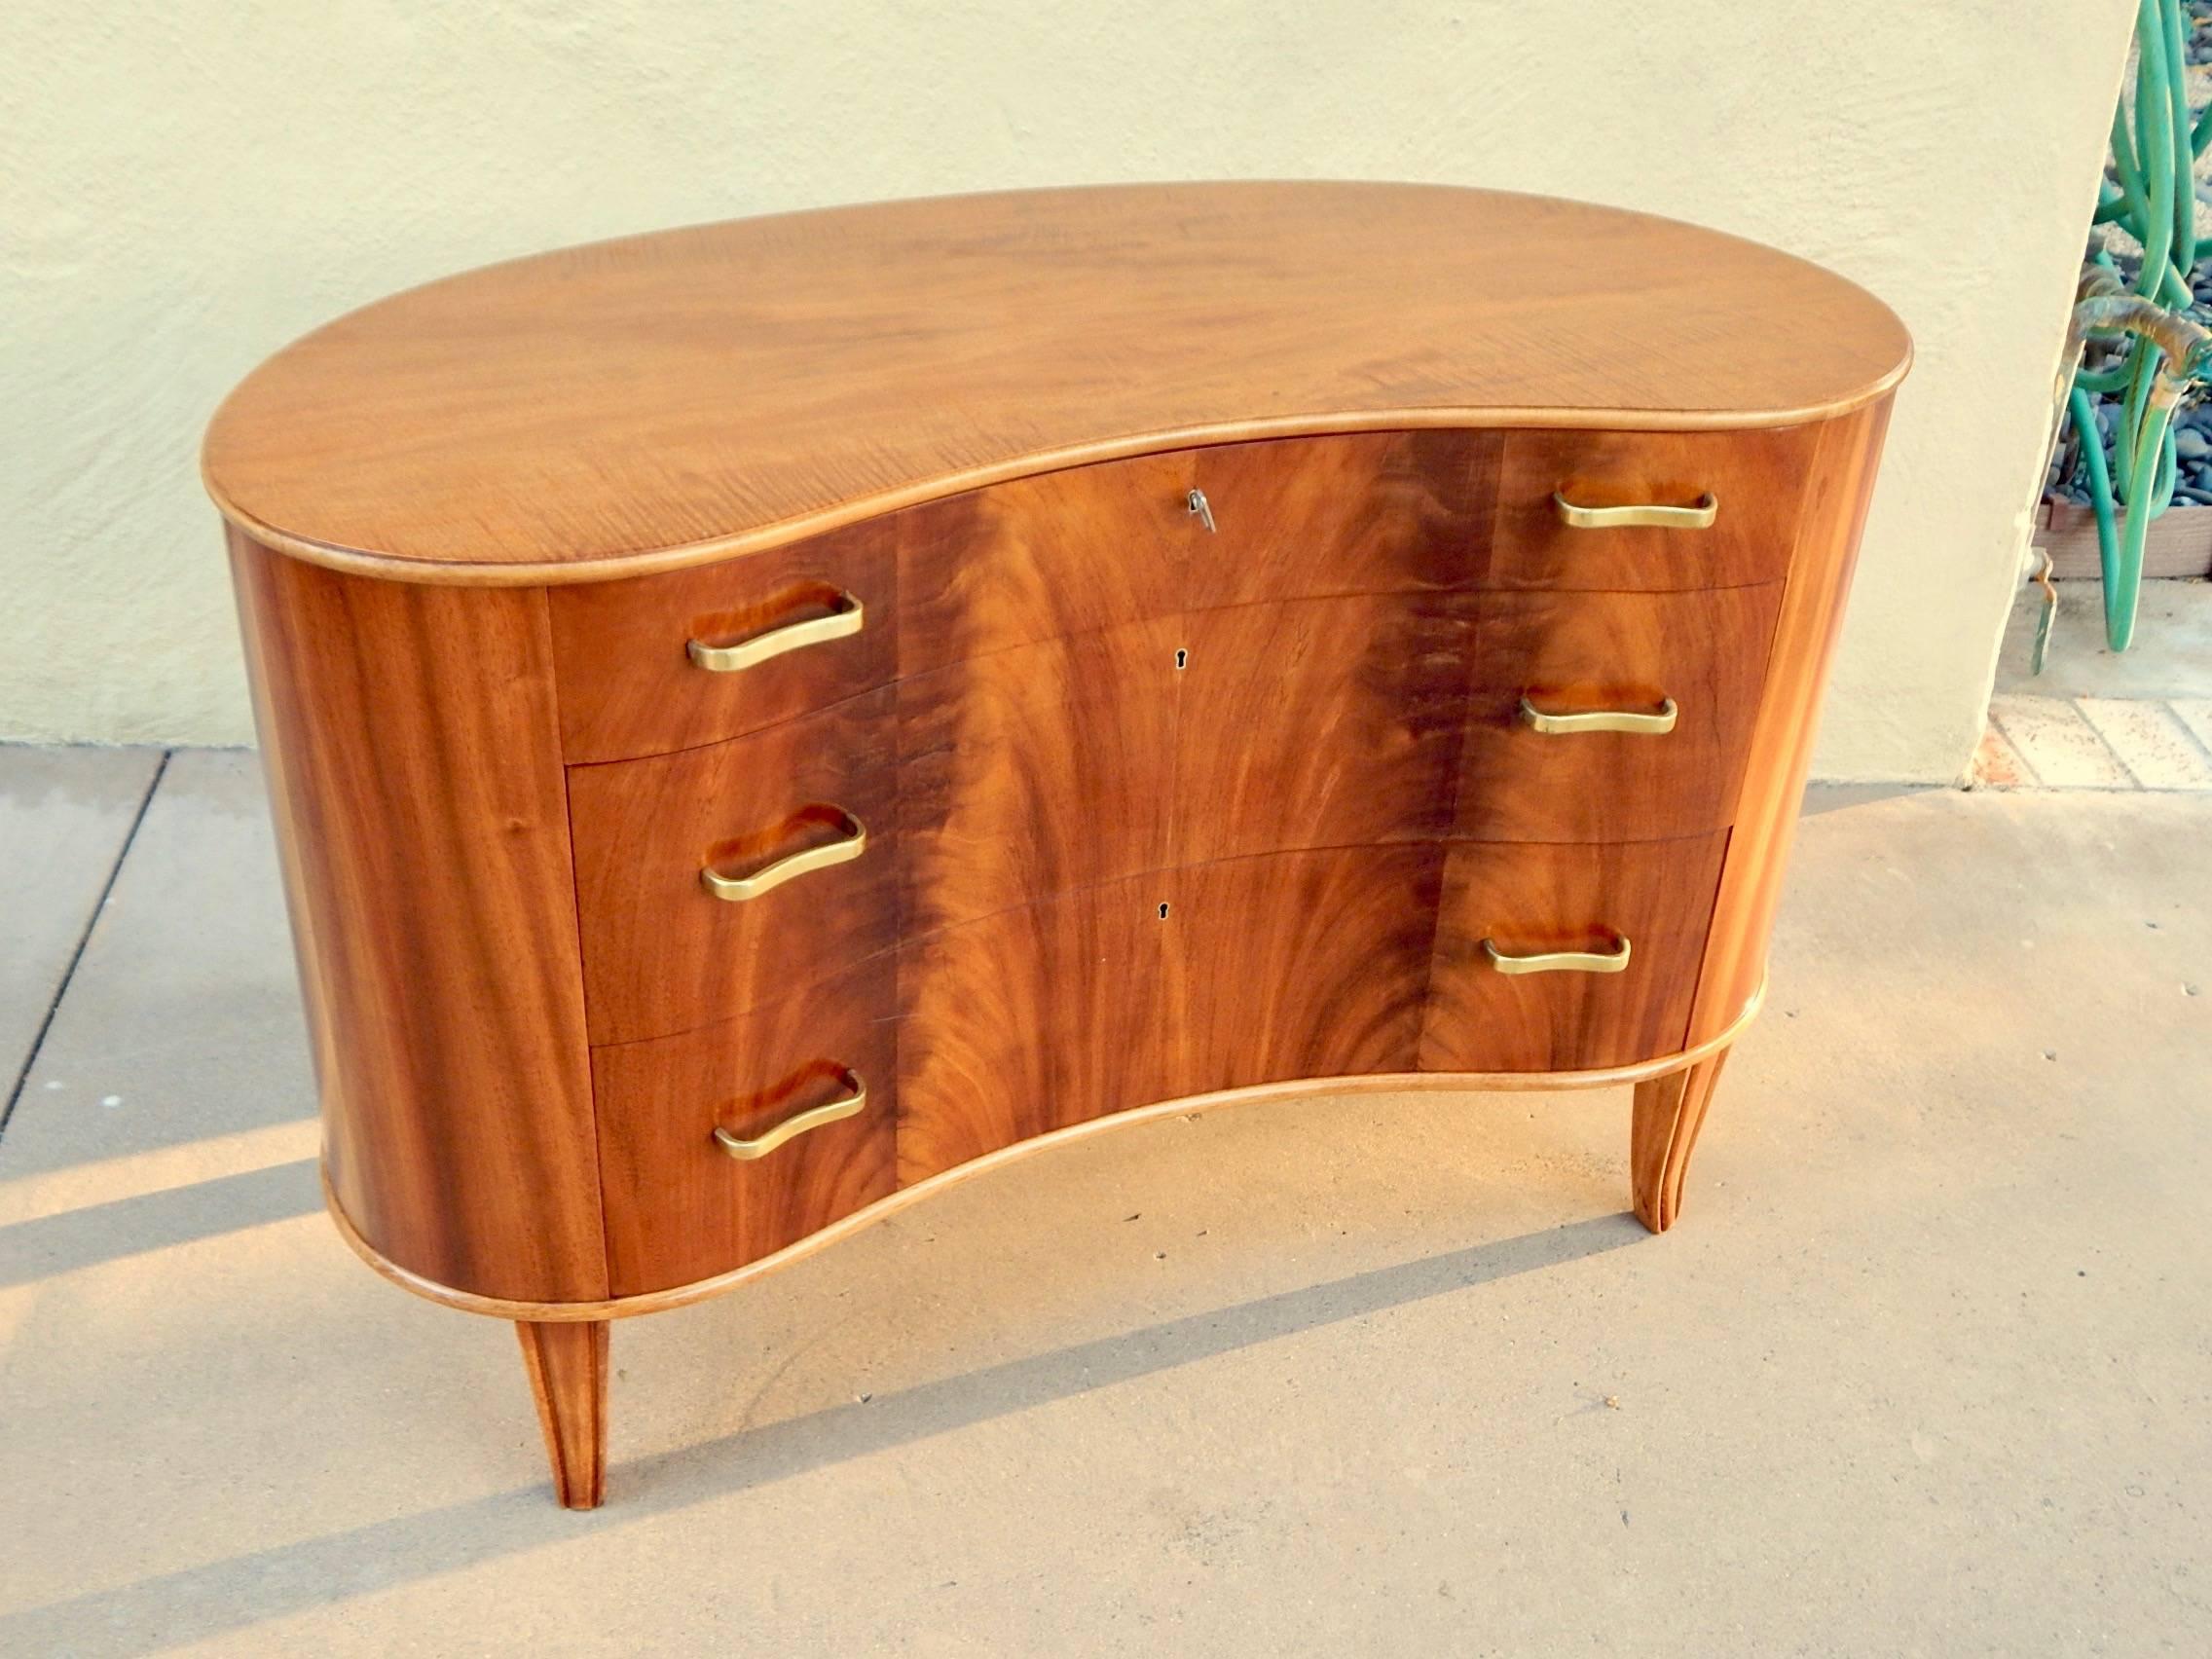 Swedish 1940s moderne kidney shaped chest of drawers rendered in highly figured, book matched Santo Domingo mahogany. With four saber legs. All original metal pulls. 
This chest has just been beautifully restored by our craftsmen. Tagged, Ferdinand